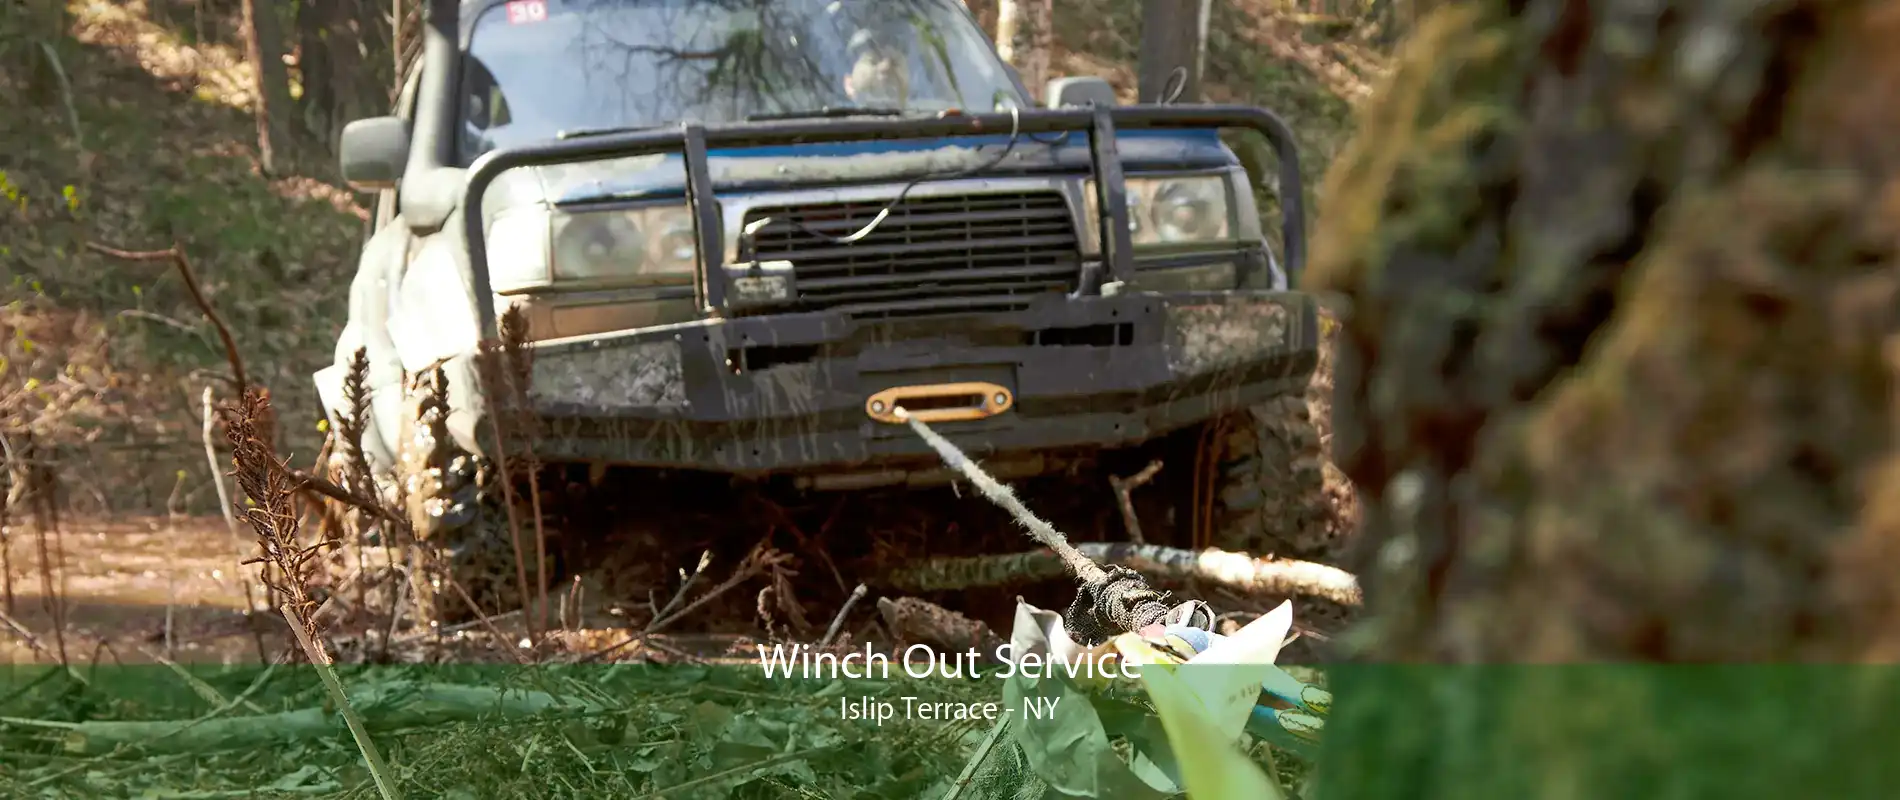 Winch Out Service Islip Terrace - NY